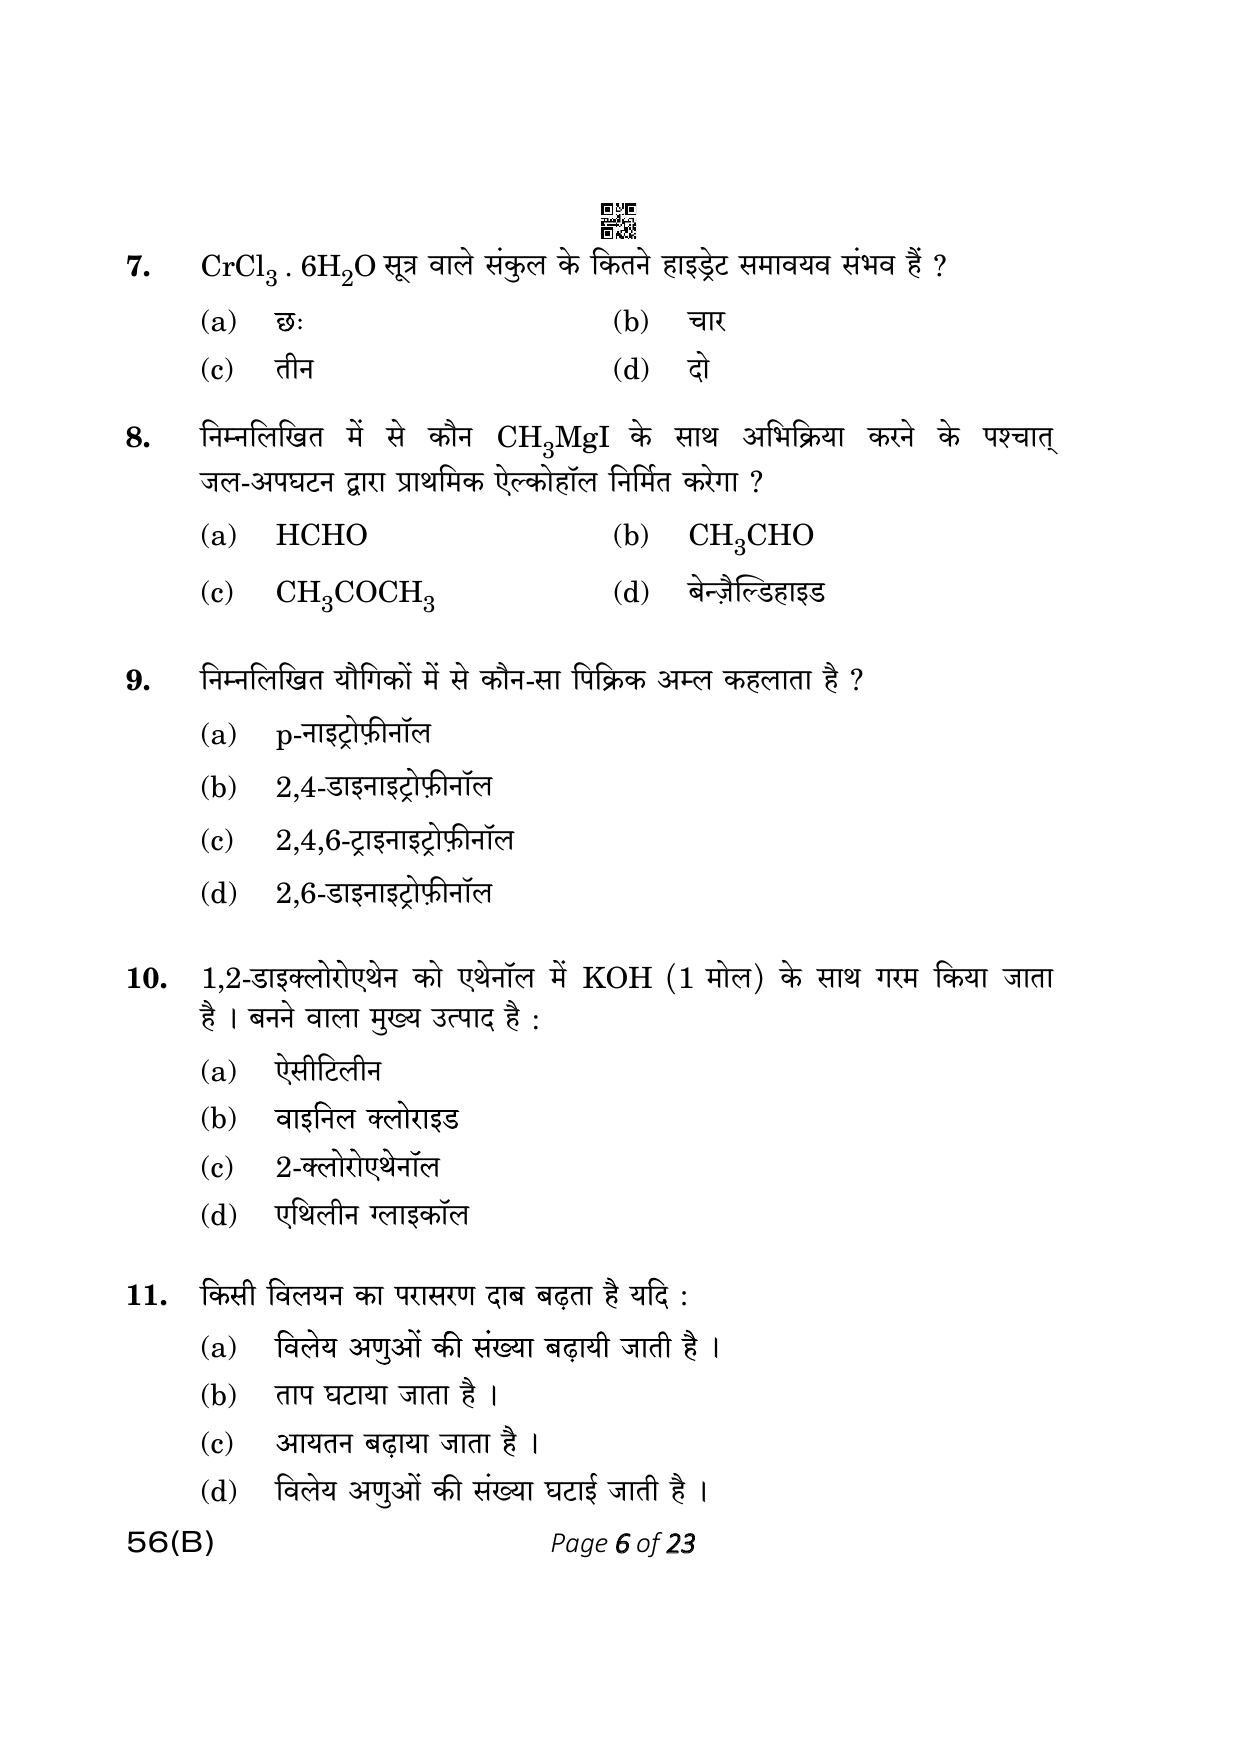 CBSE Class 12 56-B Chemistry 2023 (Compartment) Question Paper - Page 6